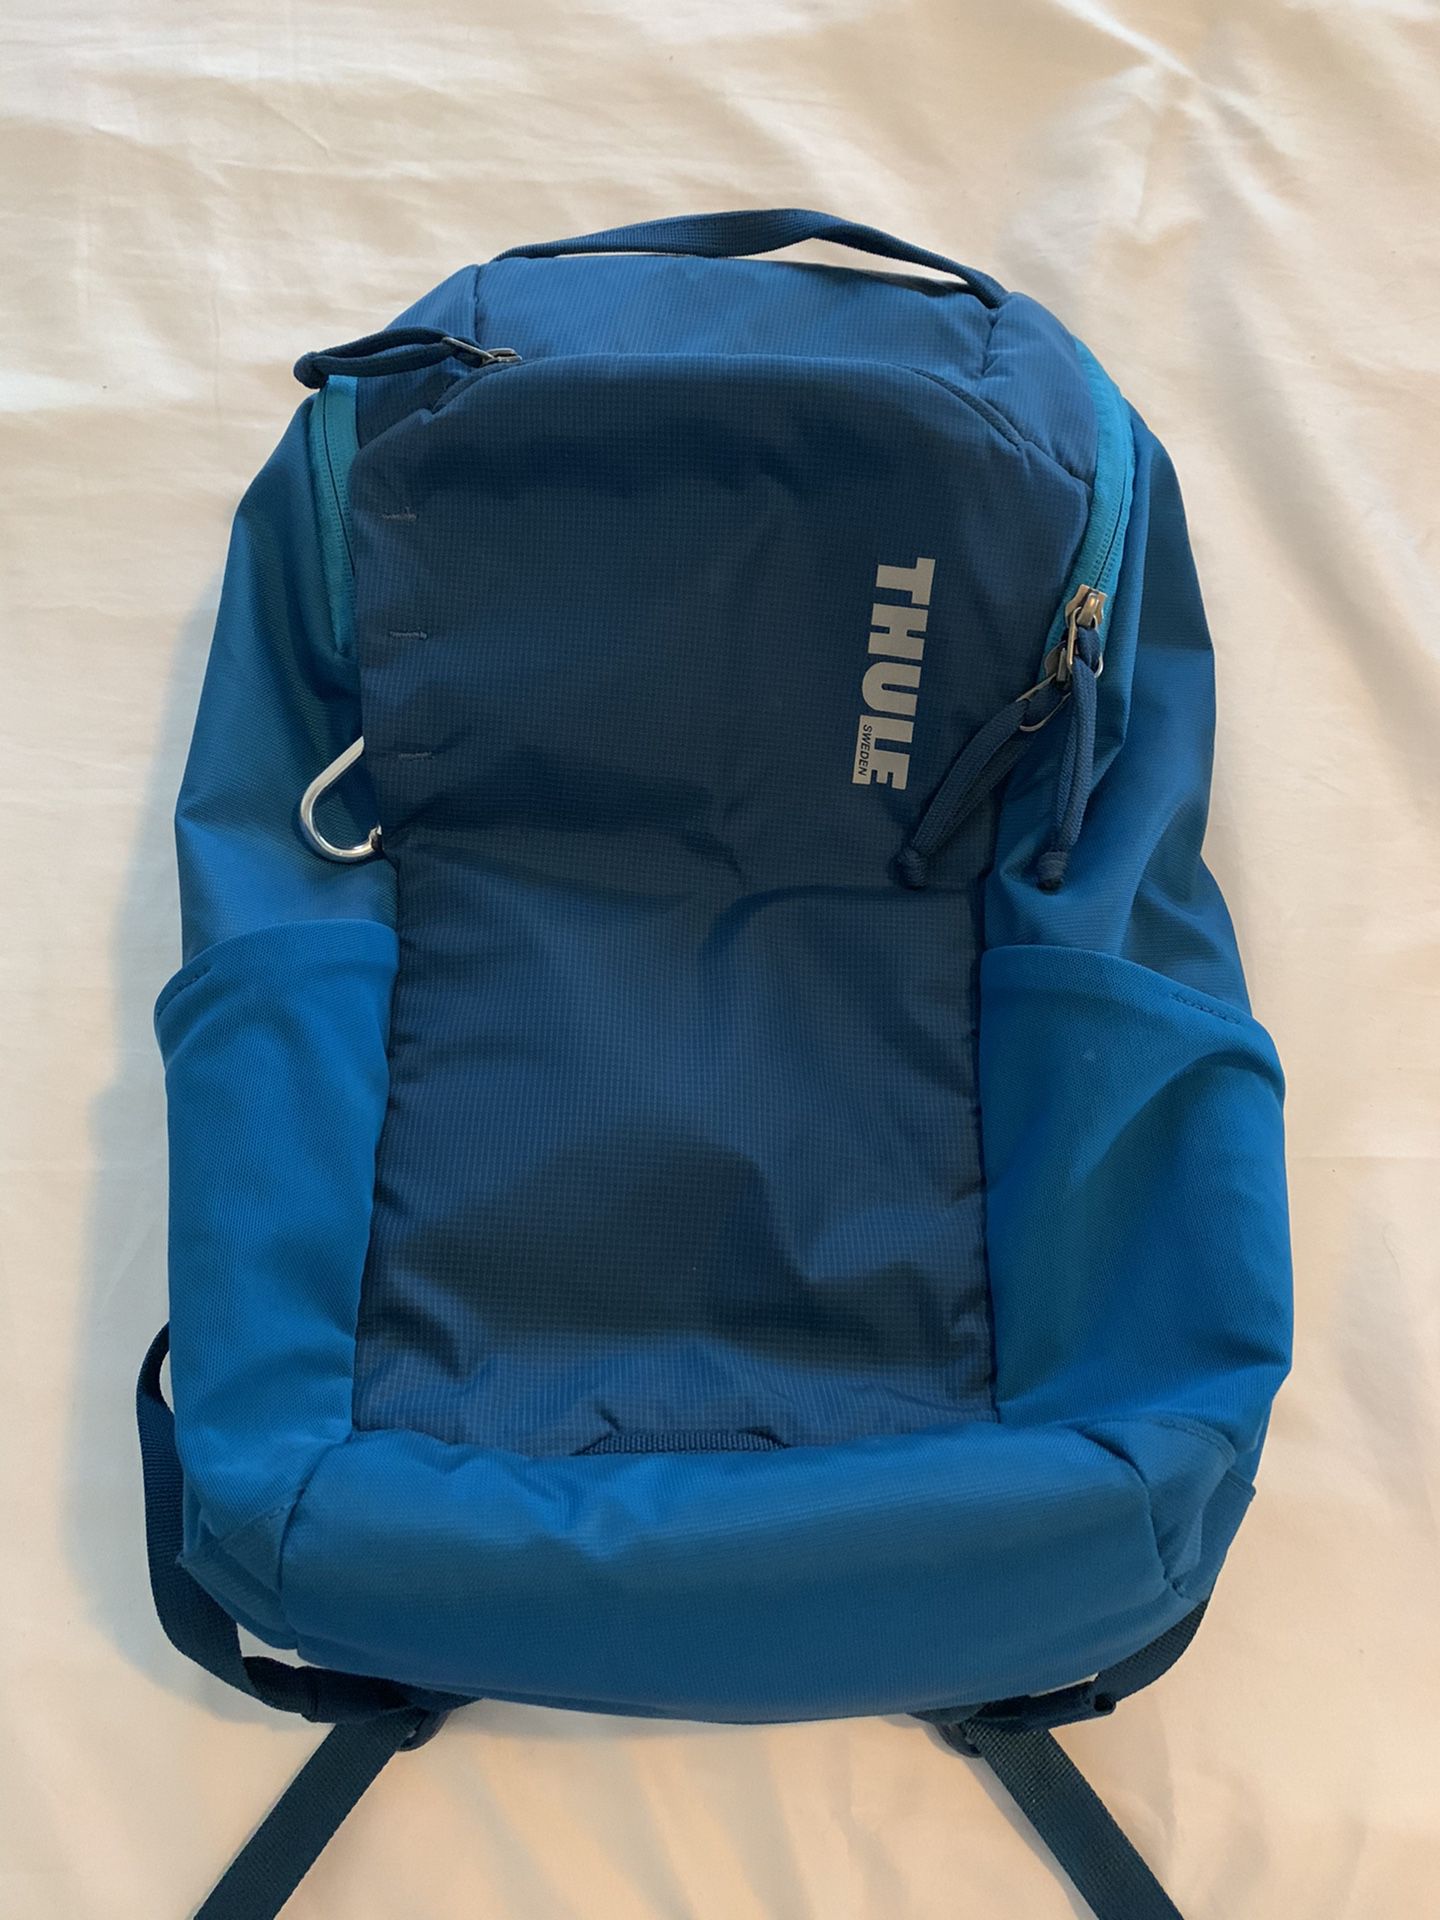 Thule Enroute 14L Travel Backpack